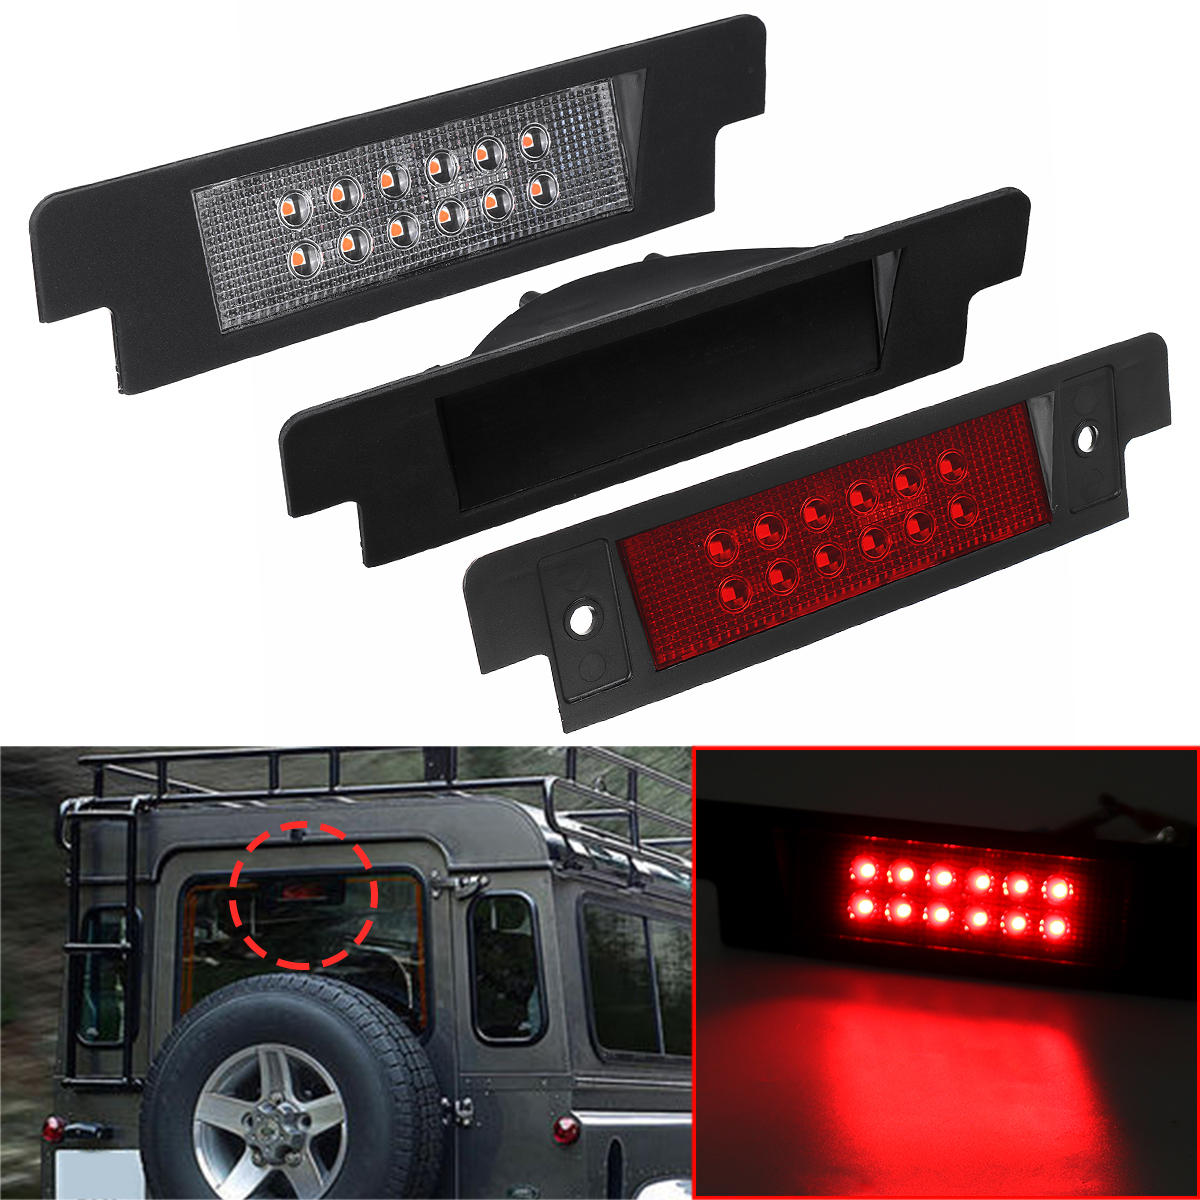 LED High Mount Stop Tail remlichtlamp Rood voor Land Rover Defender 1990 -2016 Discovery 1 2 1994-20